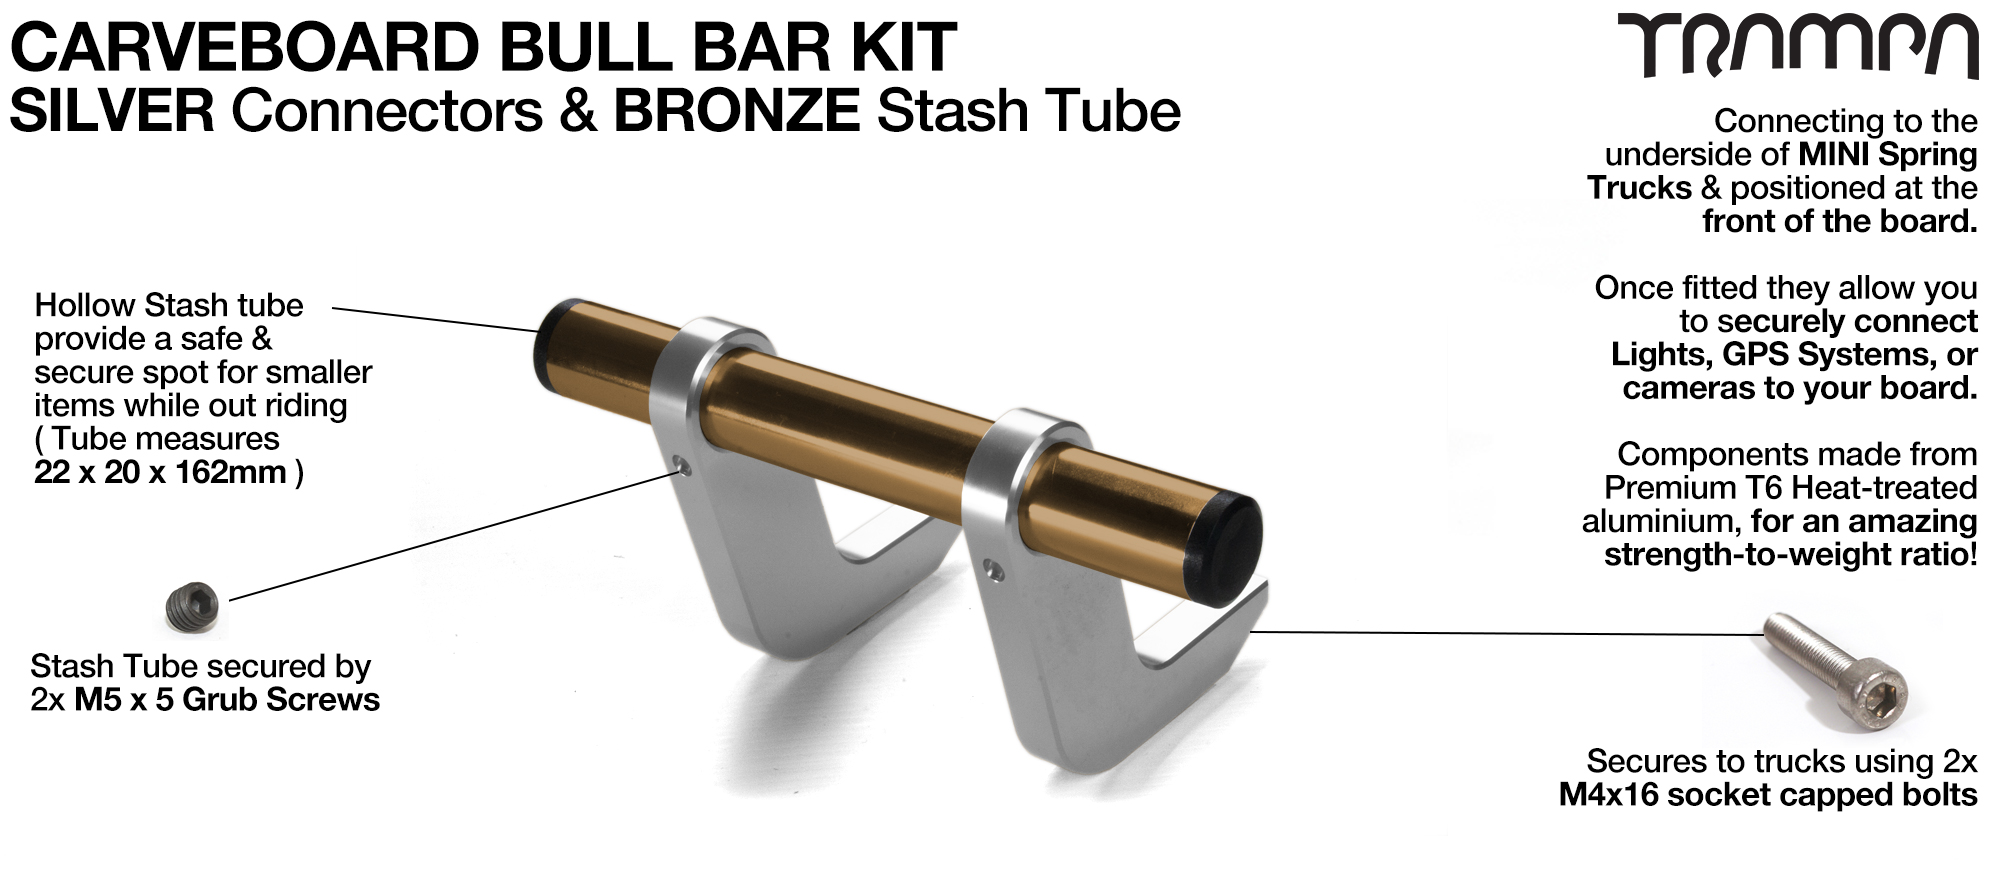 SILVER Uprights & BRONZE Crossbar BULL BARS for CARVE BOARDS using T6 Heat Treated CNC'd Aluminum Clamps, Hollow Aluminium Stash Tubes with Rubber end bungs 